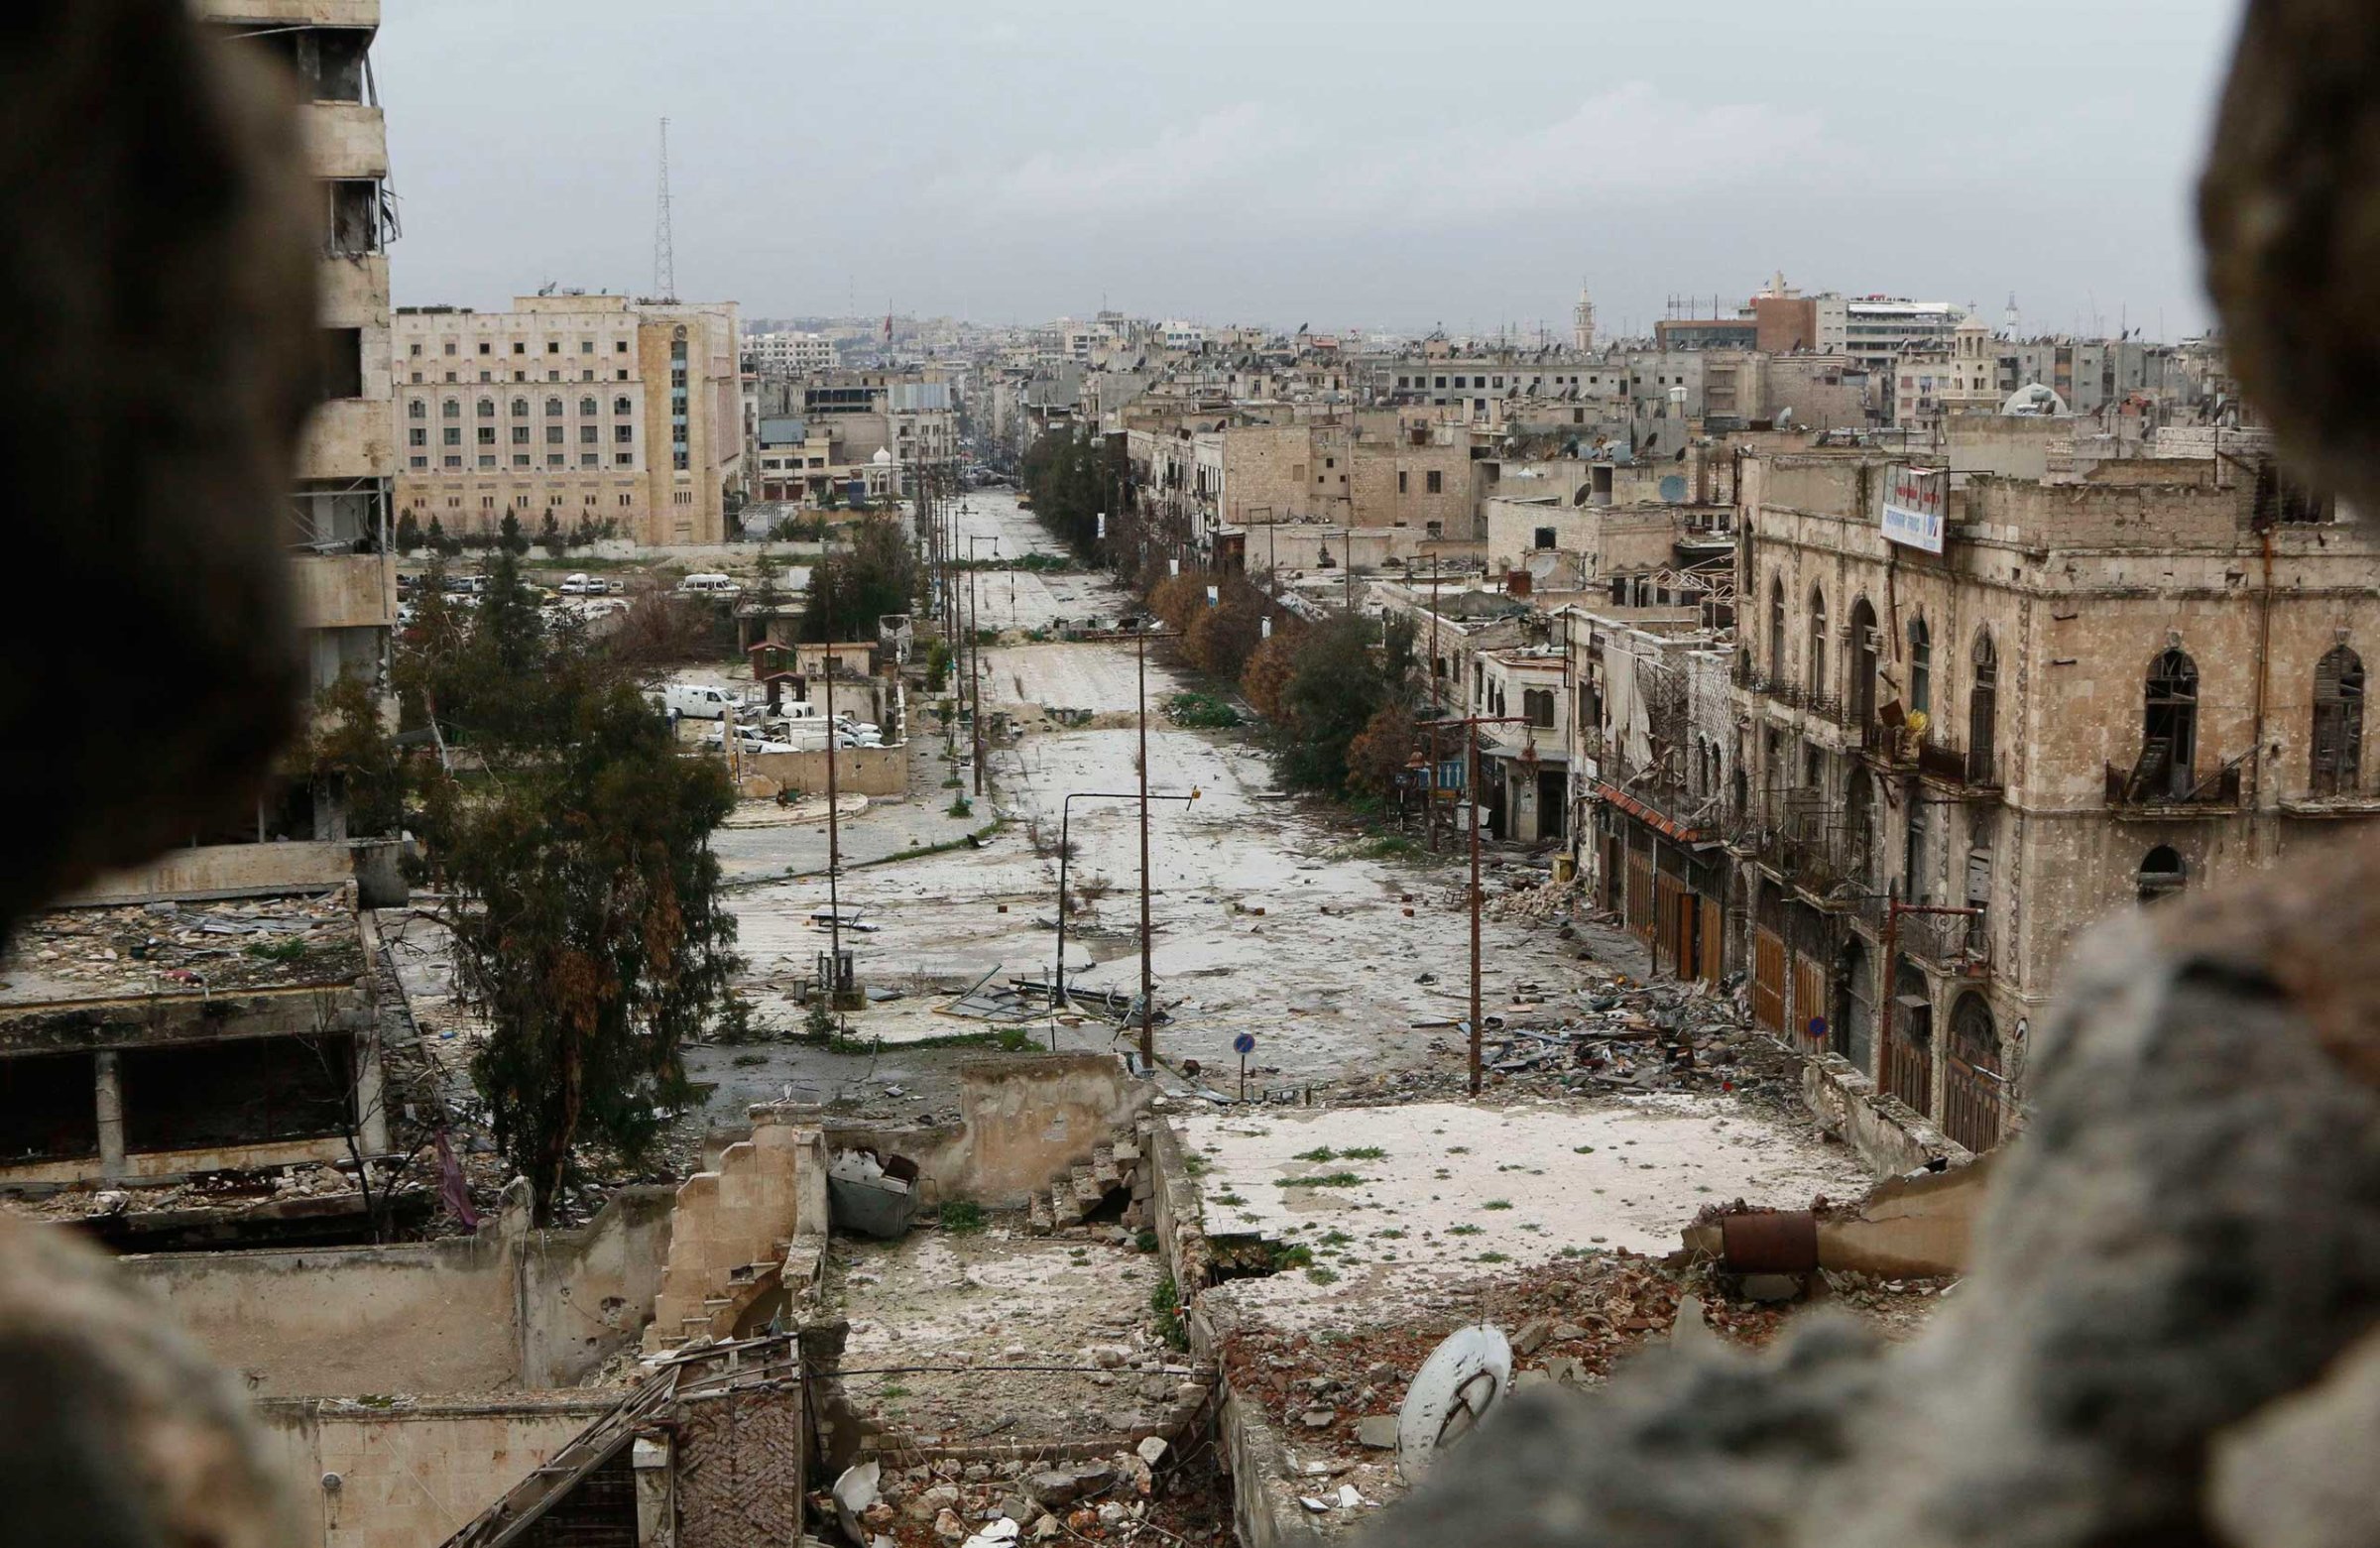 A general view shows damaged buildings along a deserted street and an area controlled by forces loyal to Syria's President Bashar Assad, as seen from a rebel-controlled area at the Bab al-Nasr frontline in Aleppo, Feb. 10, 2015.